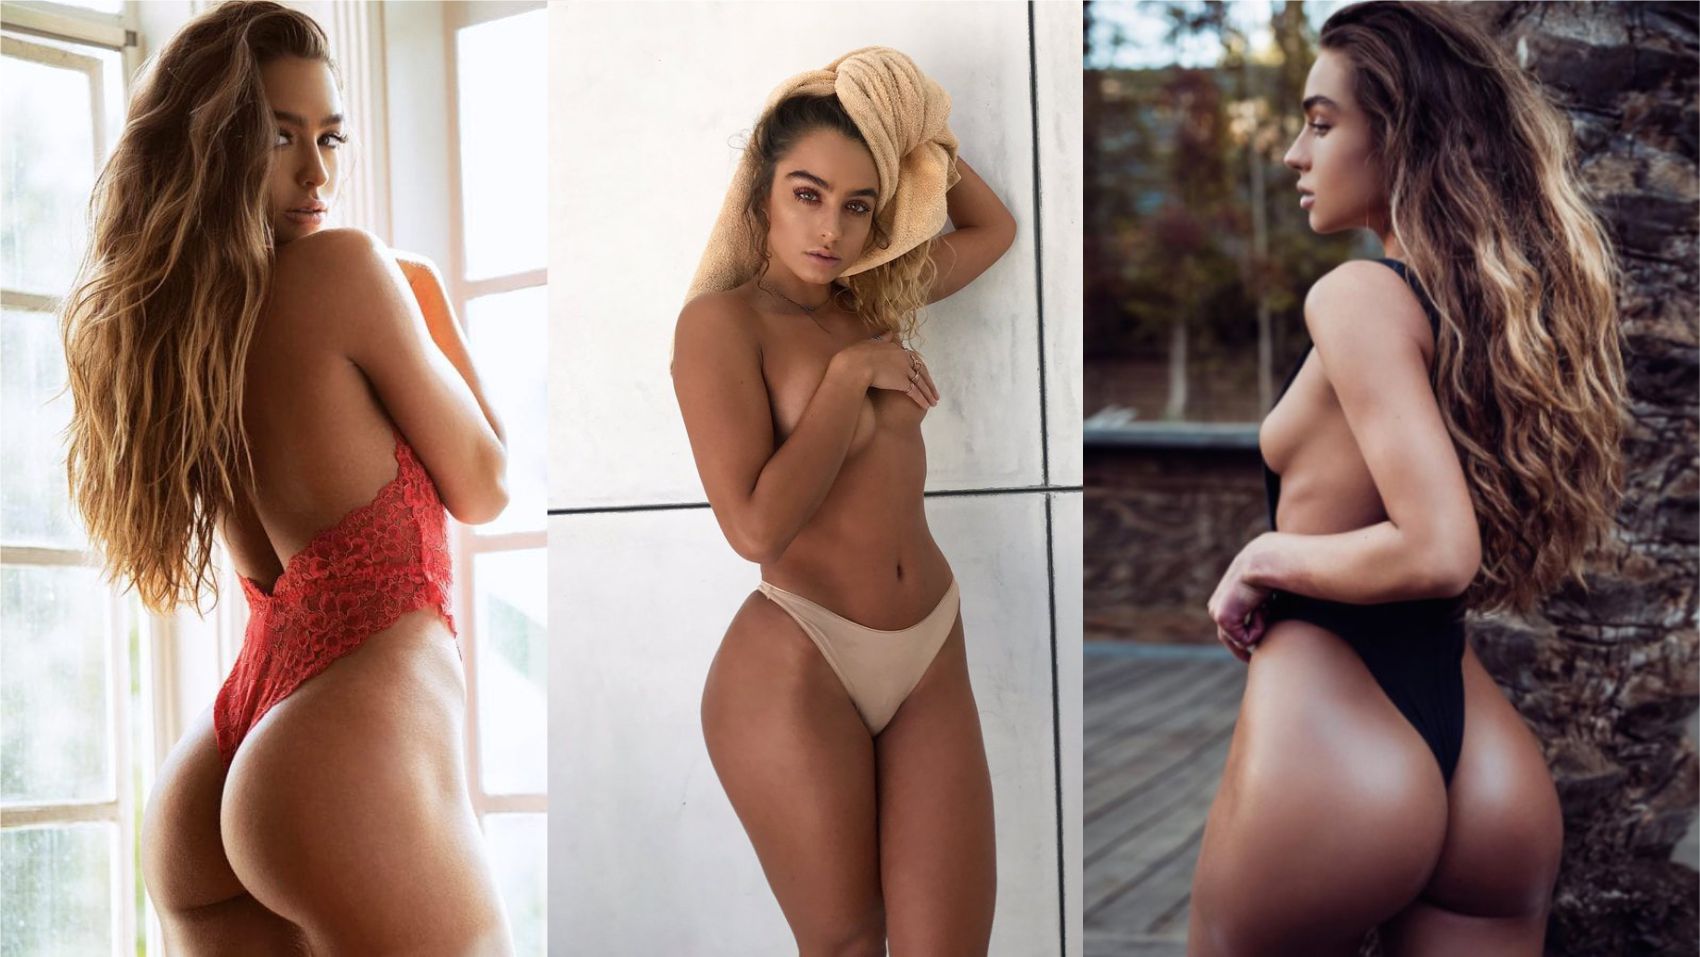 Model.Sommer ray instagram over 24 million followers.Sommer ray age is 23.S...